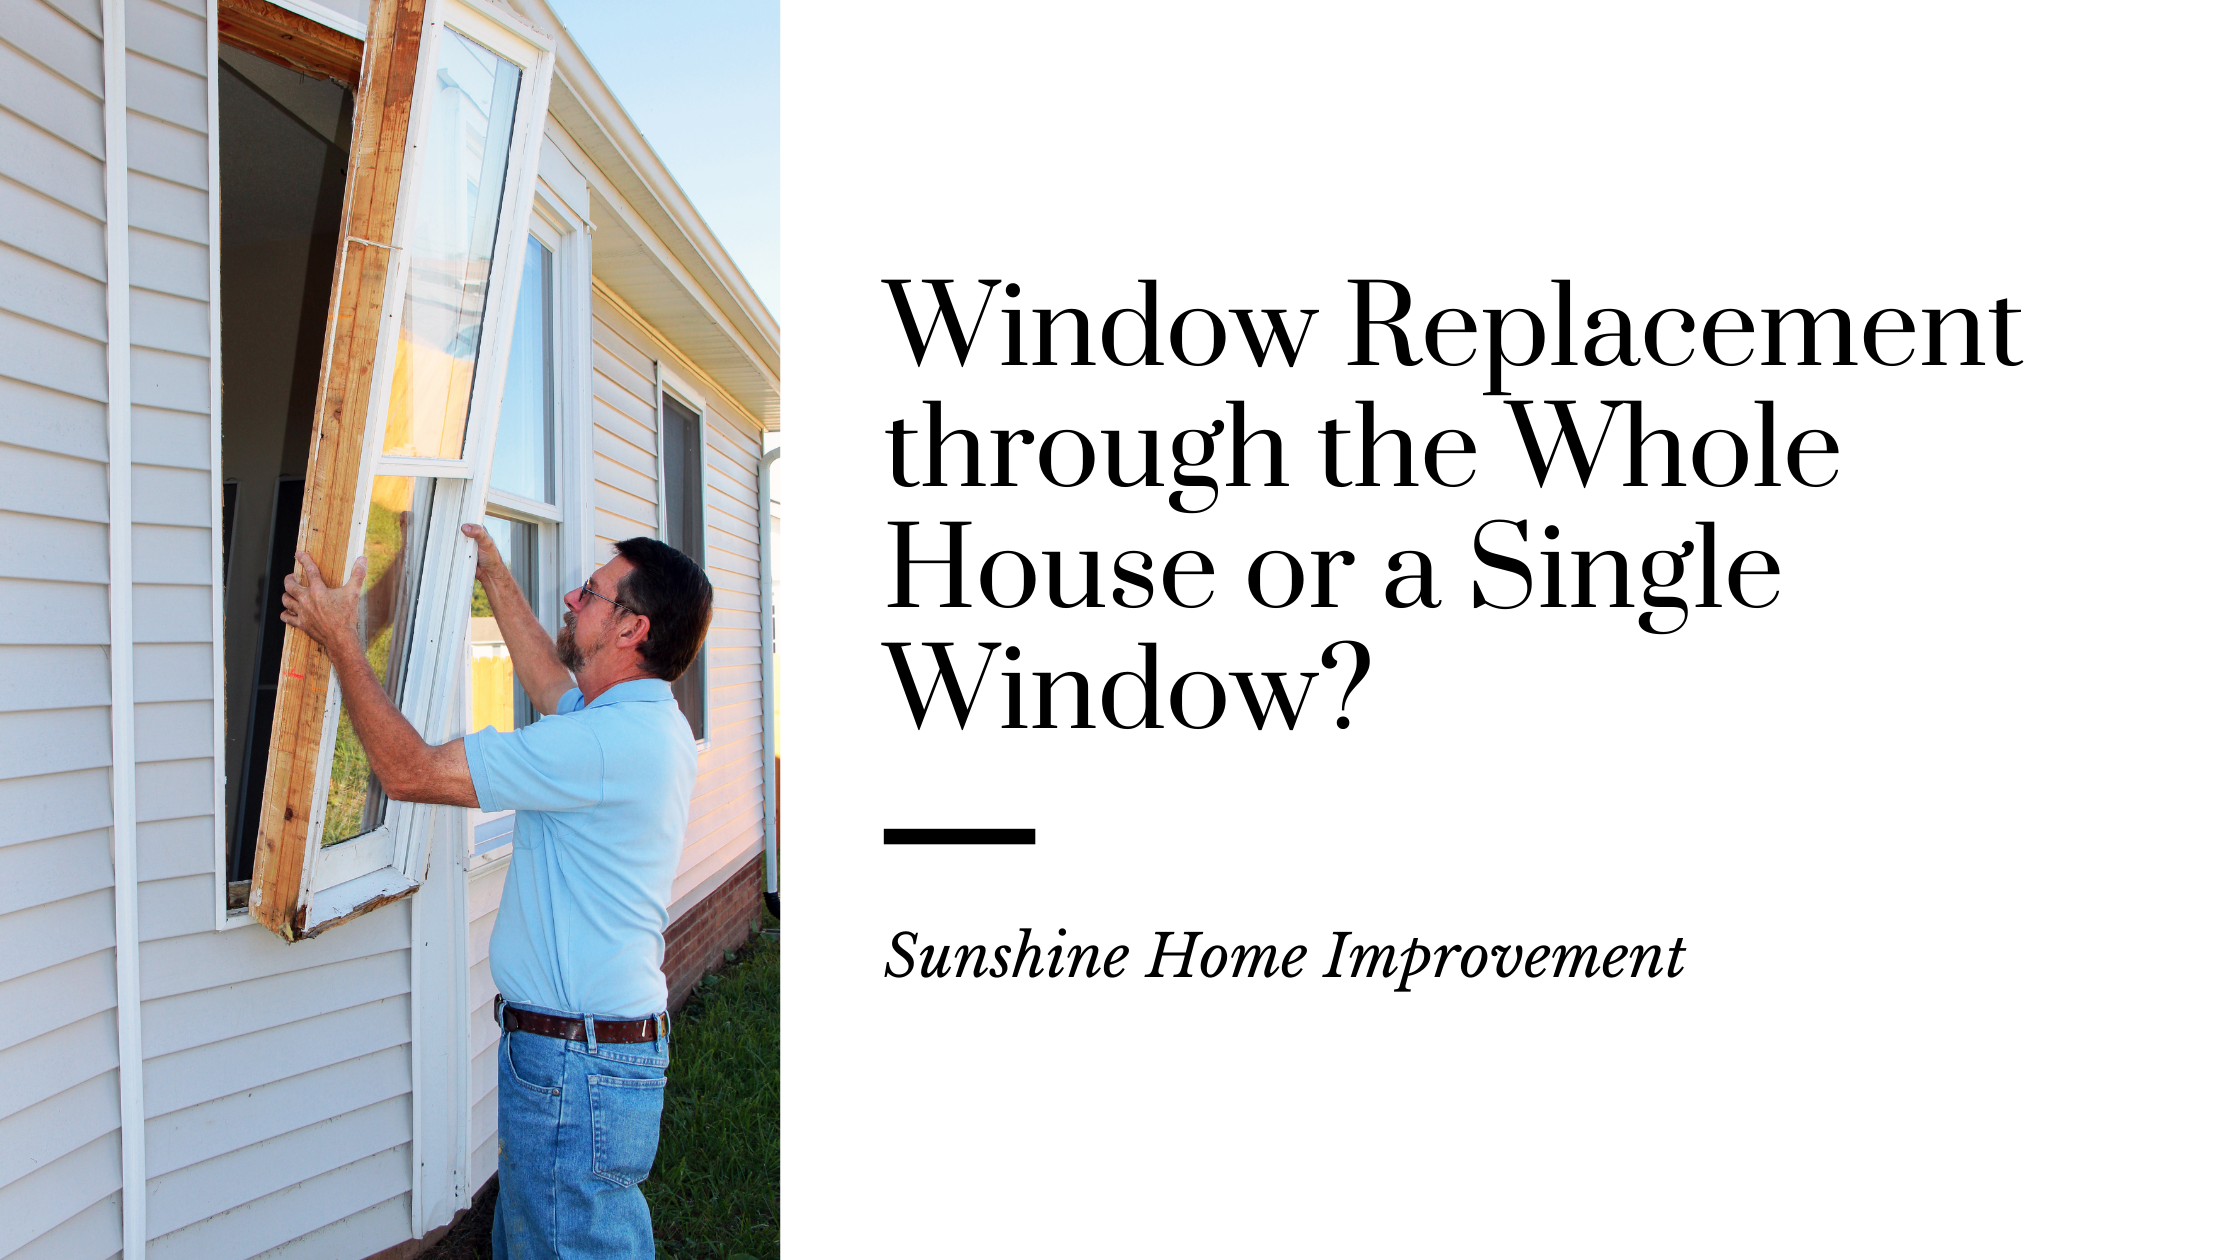 Best Window Replacement Company in Kansas City | Affordable Windows in Kansas City